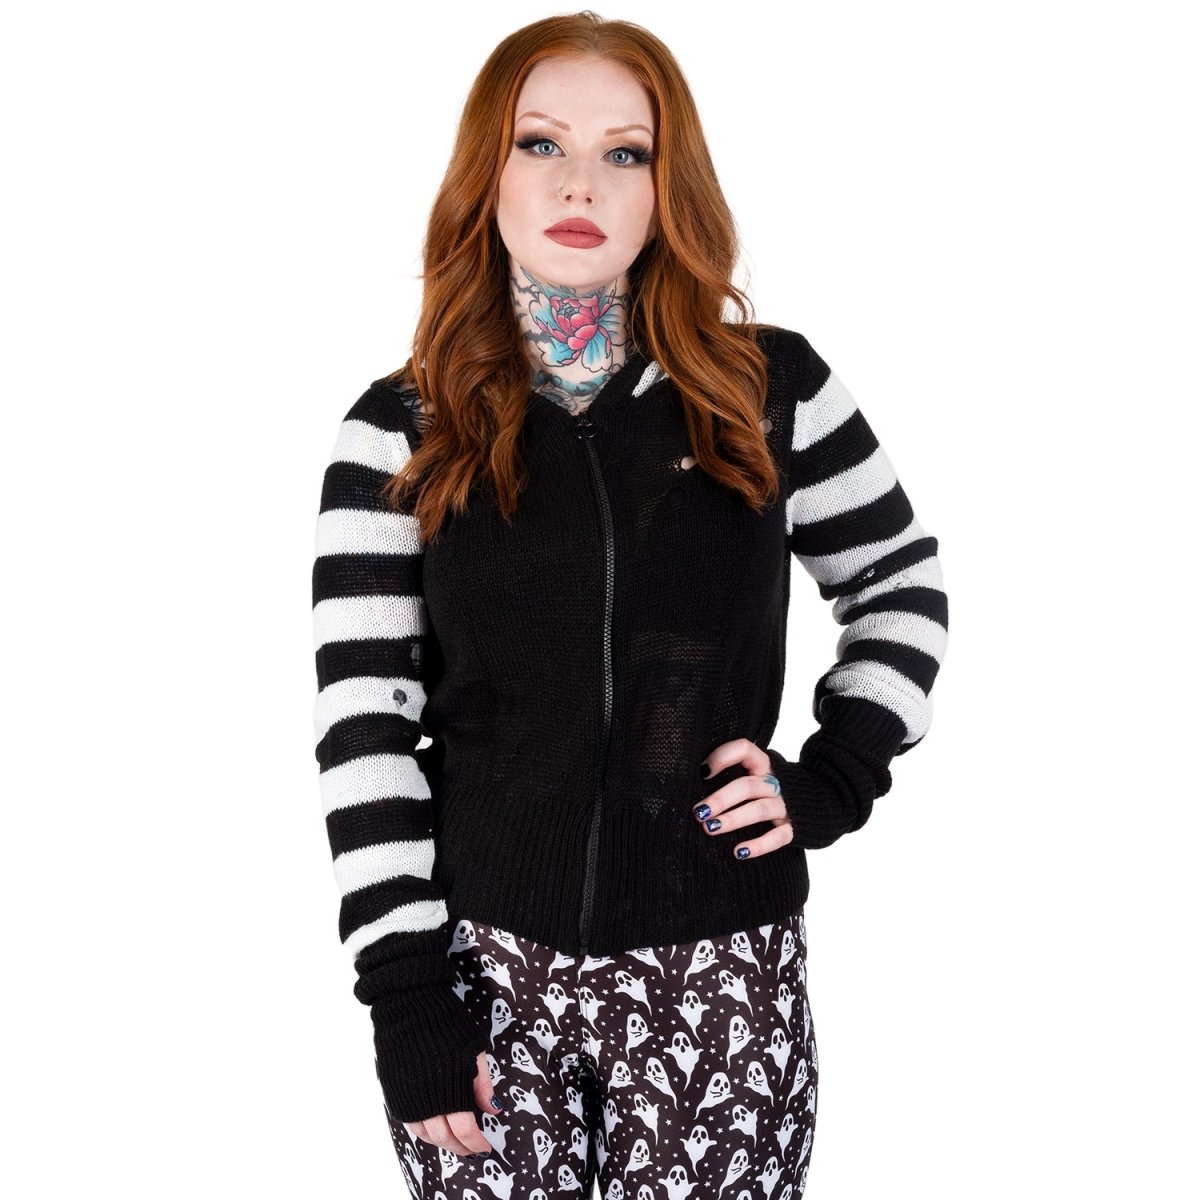 Too Fast | Spooky Ghost Zip Up Long Sleeve Cardigan Sweater